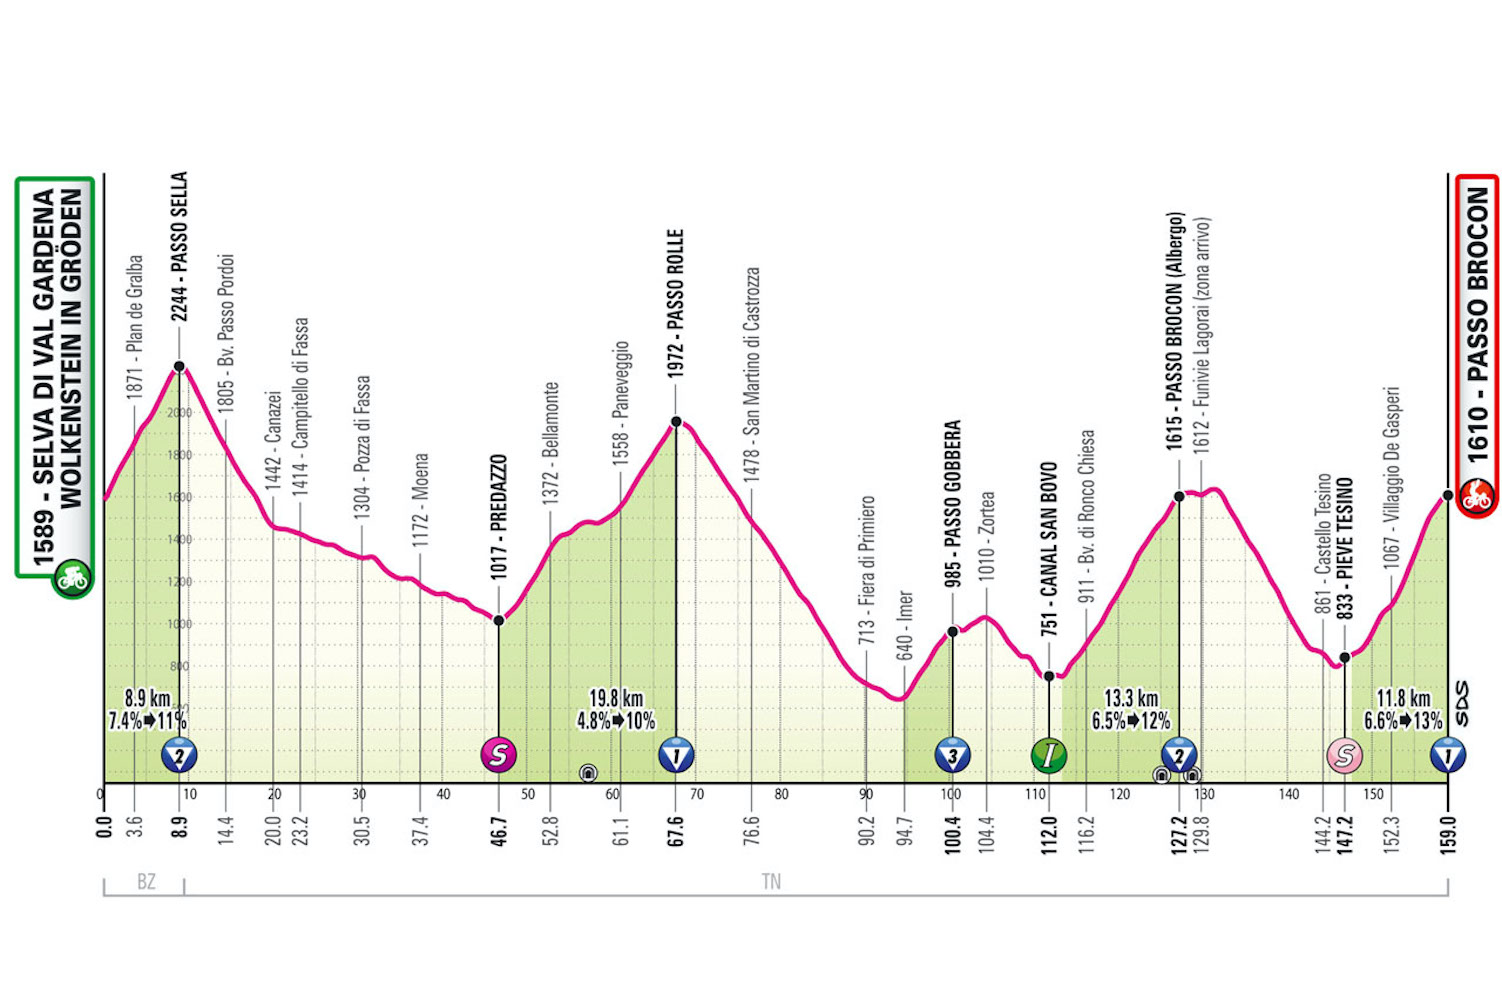 The profile of stage 17 of the Giro d'Italia.